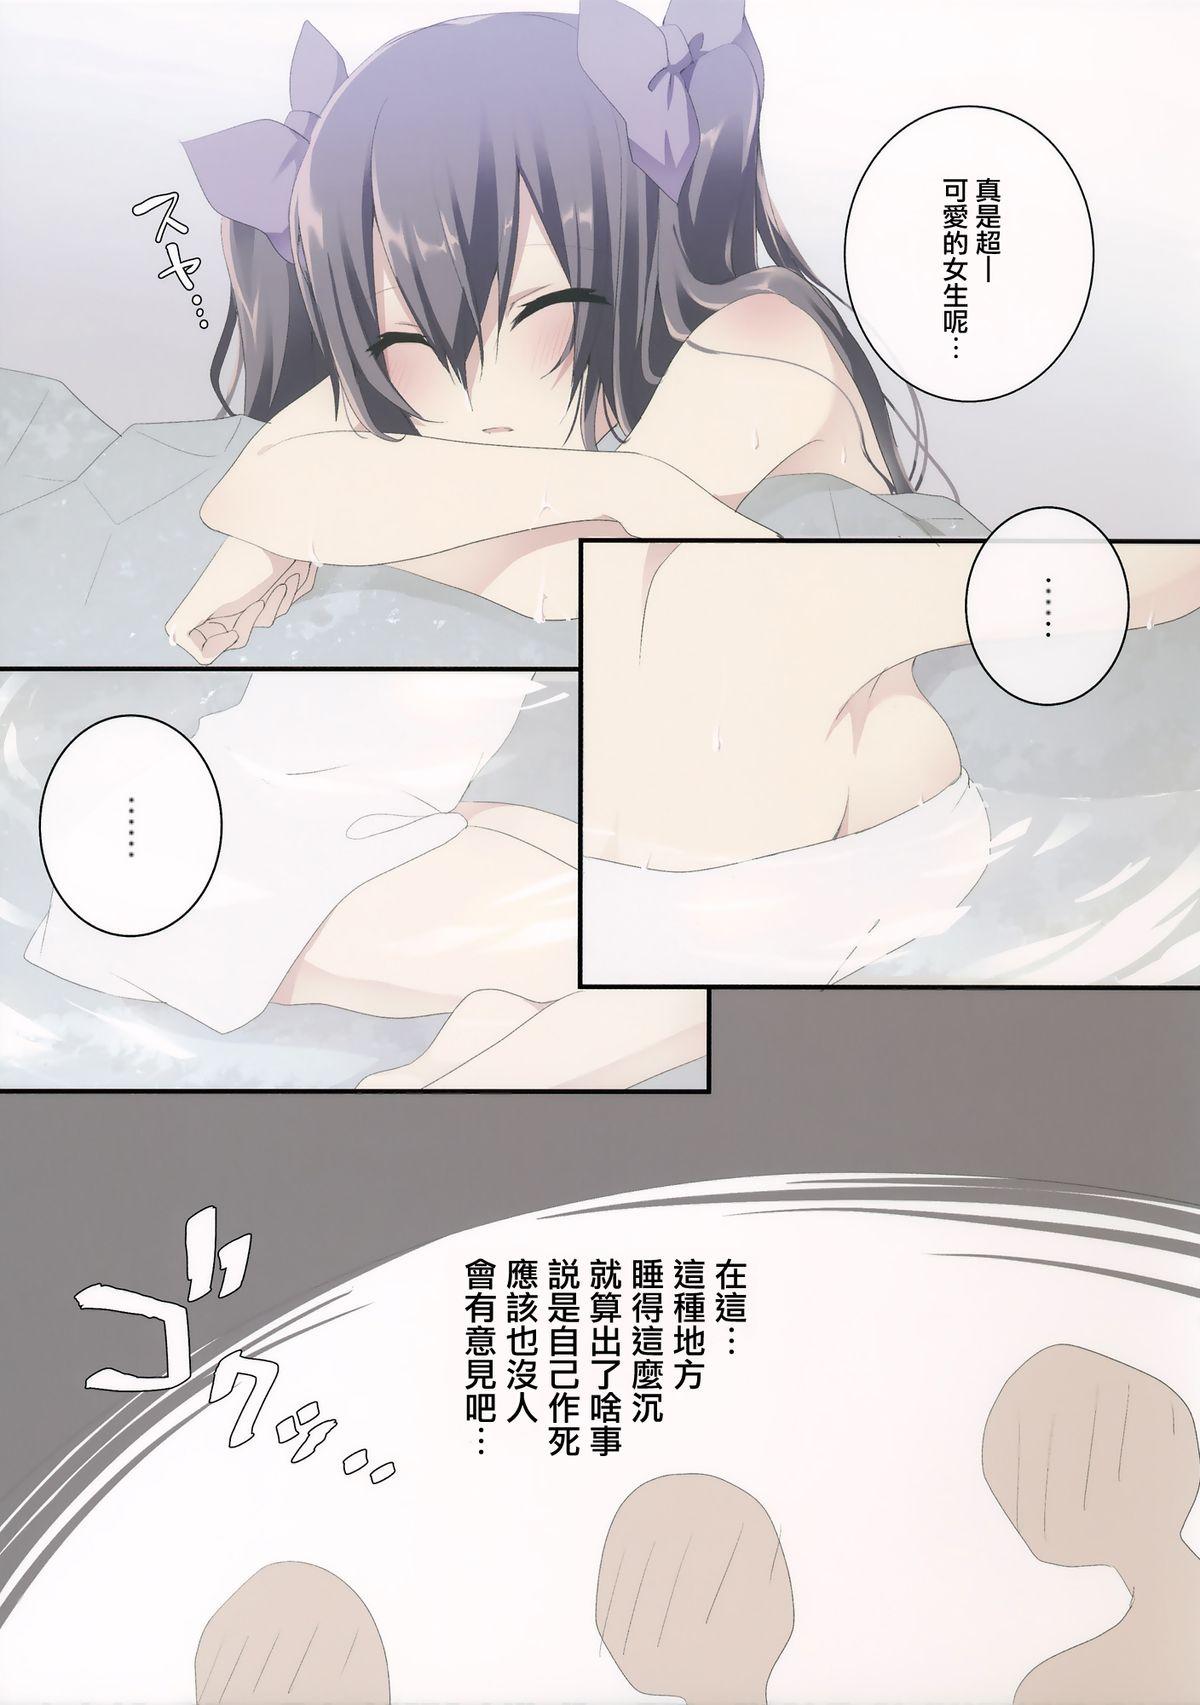 Hot Couple Sex Hatate in Tennen Onsen - Touhou project Hermana - Page 5